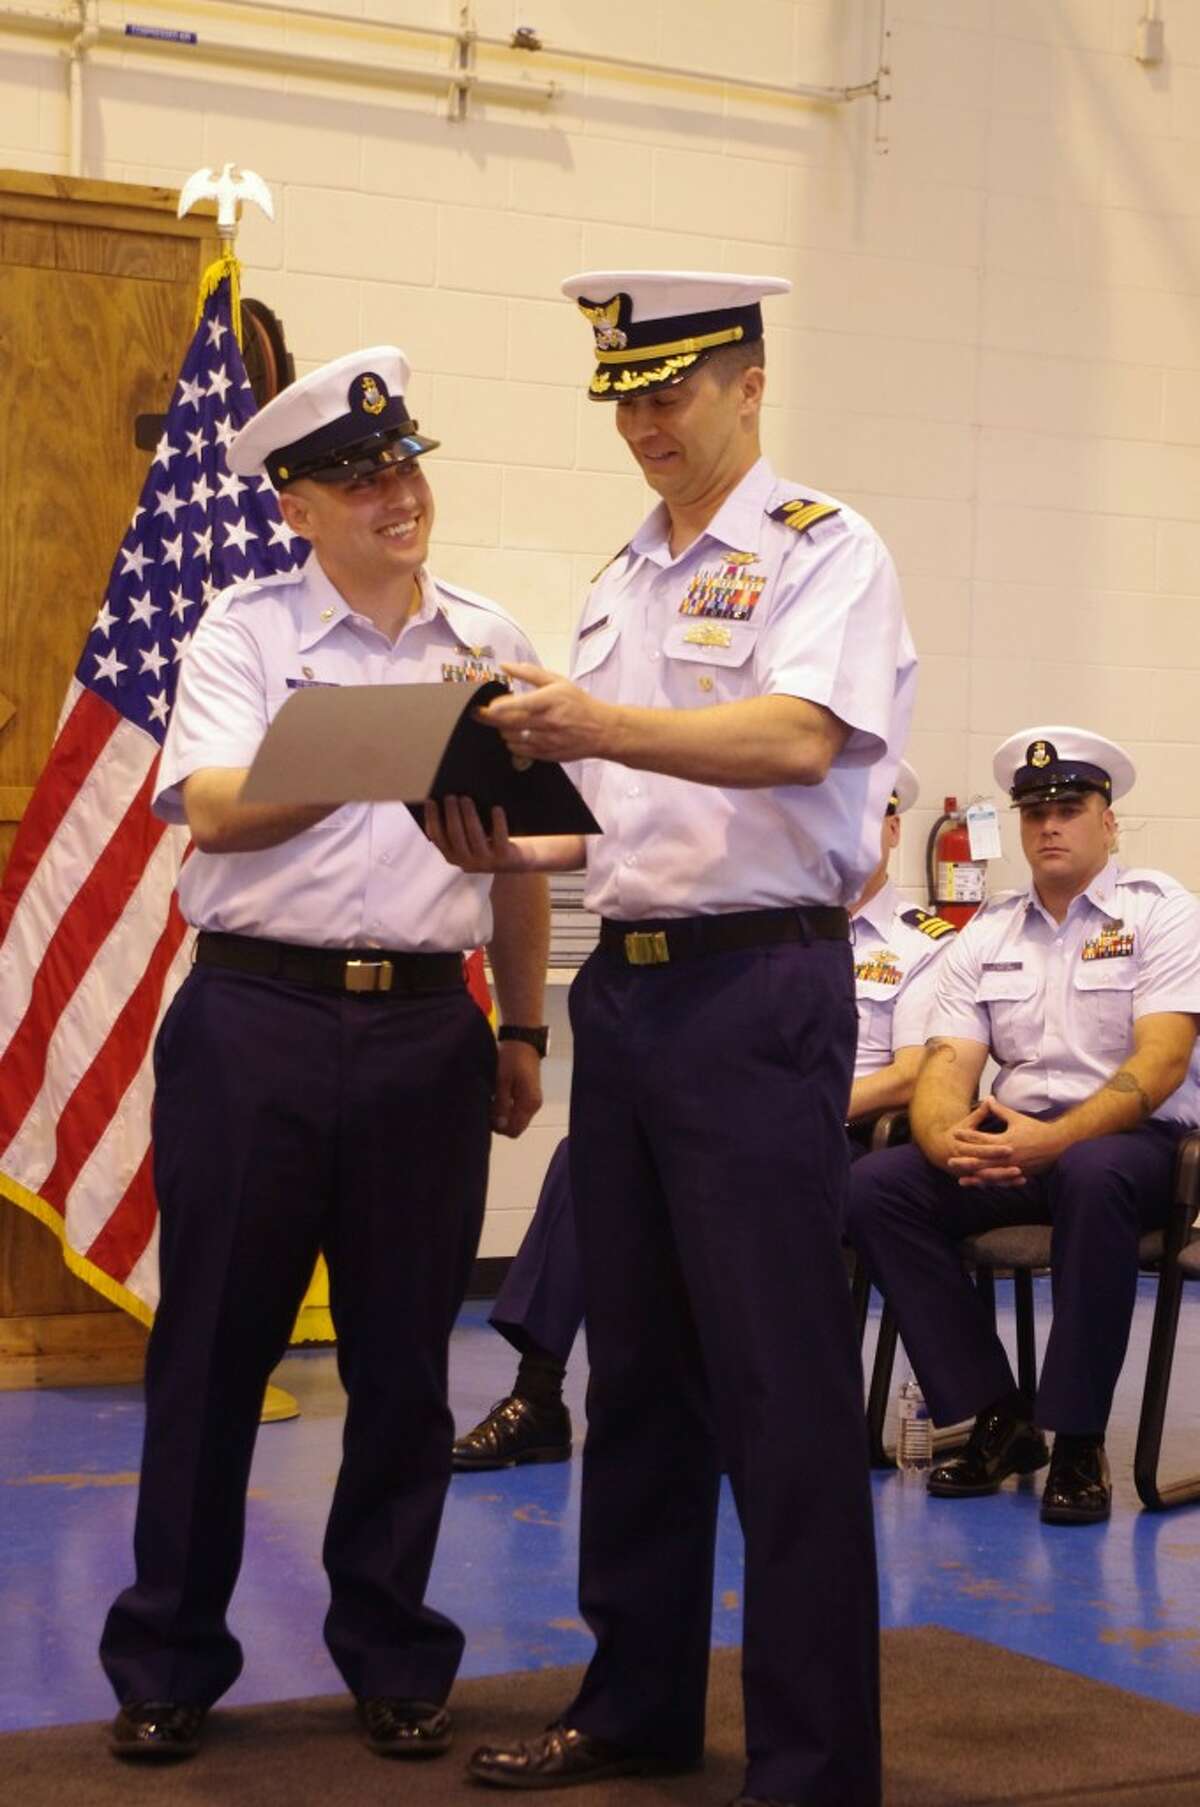 Commander Erik A. Leuenberger (right) presents a commendation medal to Chief Boatswain's Mate John L. Tribfelner on Friday at the Coast Guard Station Manistee change of command ceremony. (Dave Yarnell/News Advocate)